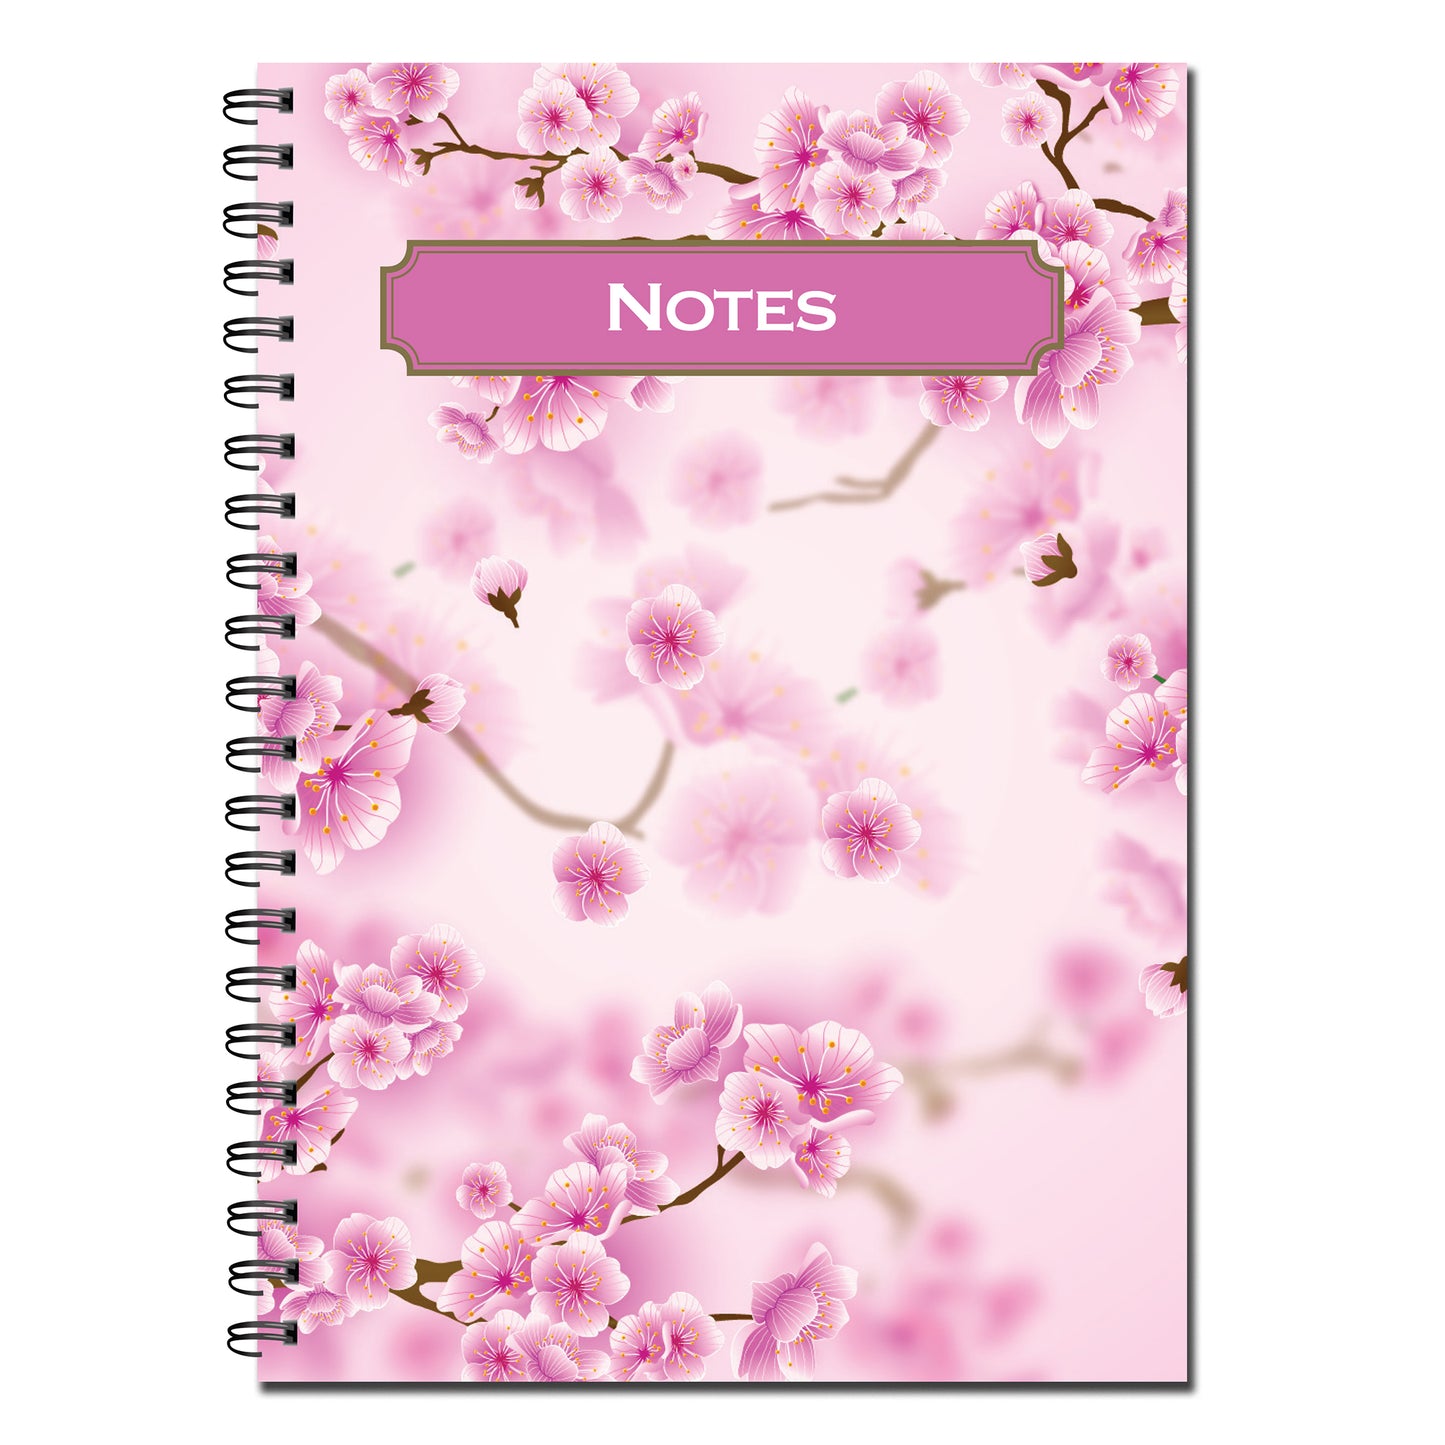 Designer Range Notebook A5 120gsm 50 double sided pages Wirobound